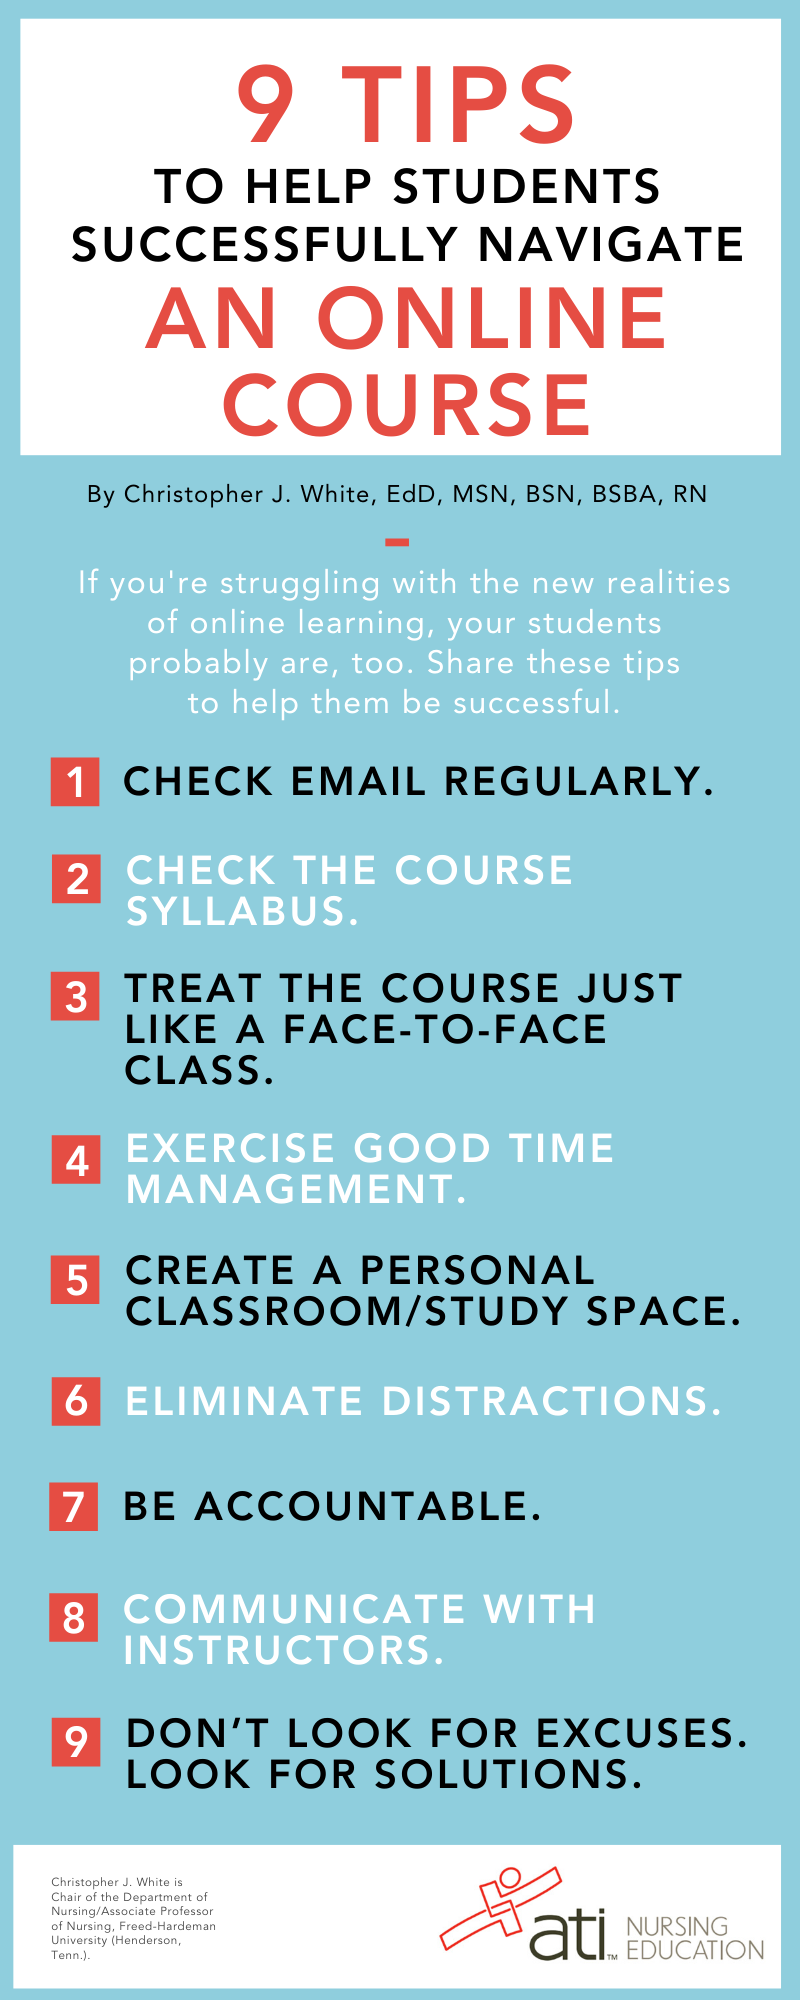 7 Tips for Teachers to Make Virtual Learning Successful